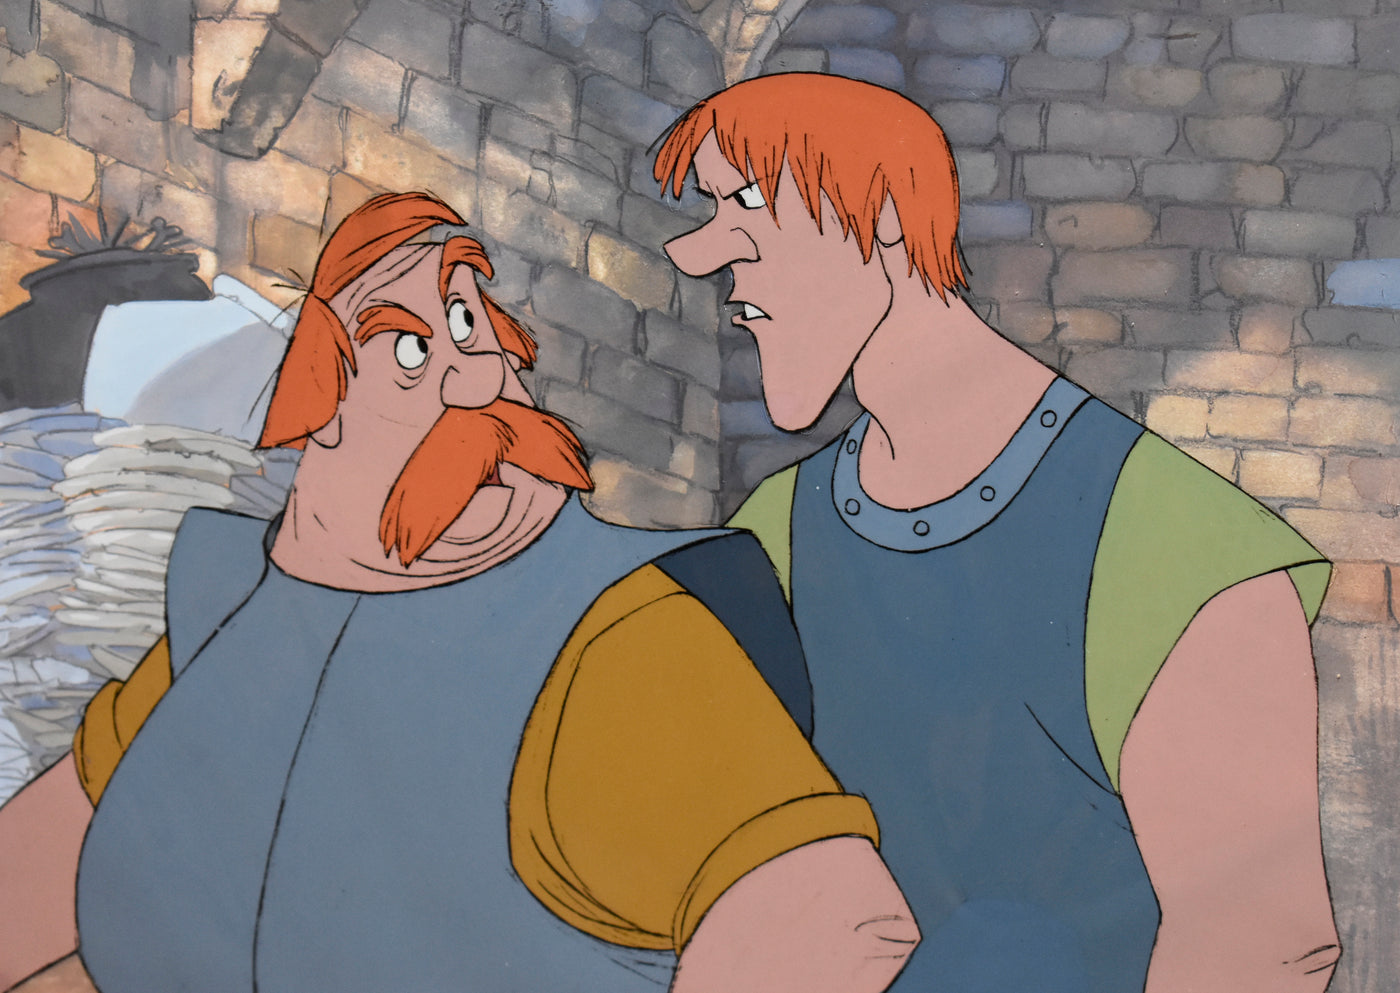 Original Walt Disney Production Cel from The Sword in the Stone featuring Sir Ector and Sir Kay